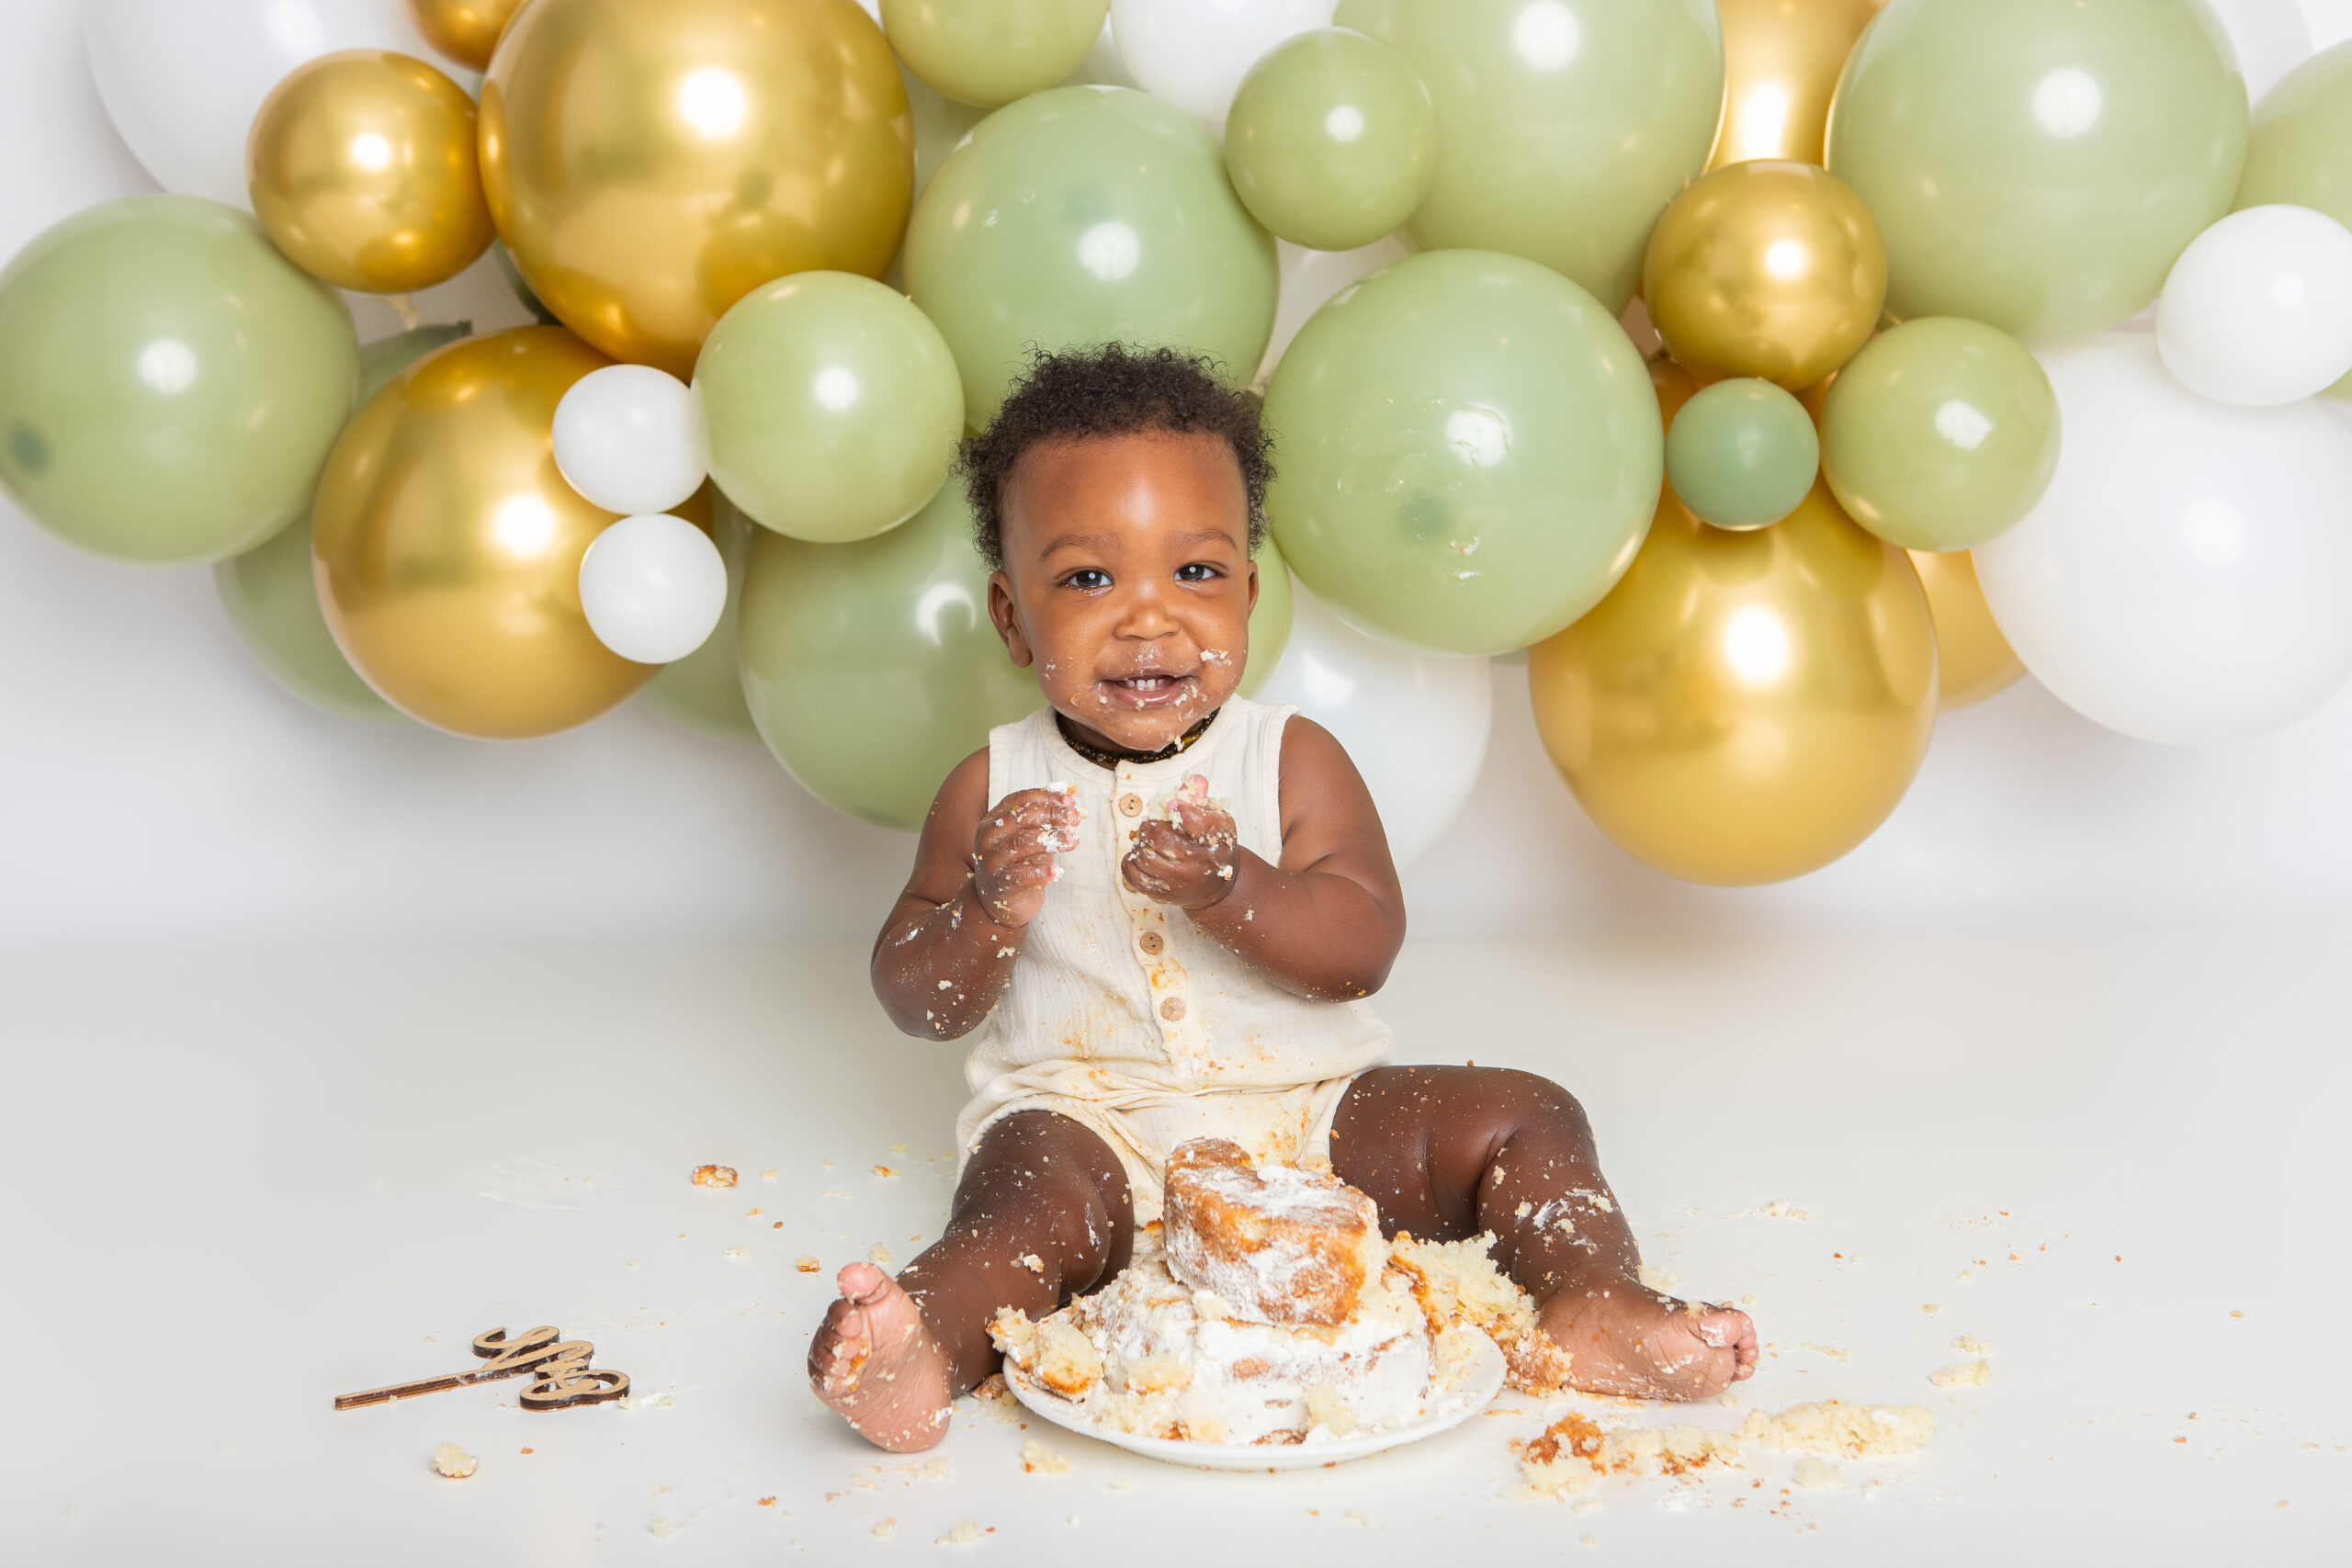 Edmonton baby's first birthday photoshoot with cake and balloons.